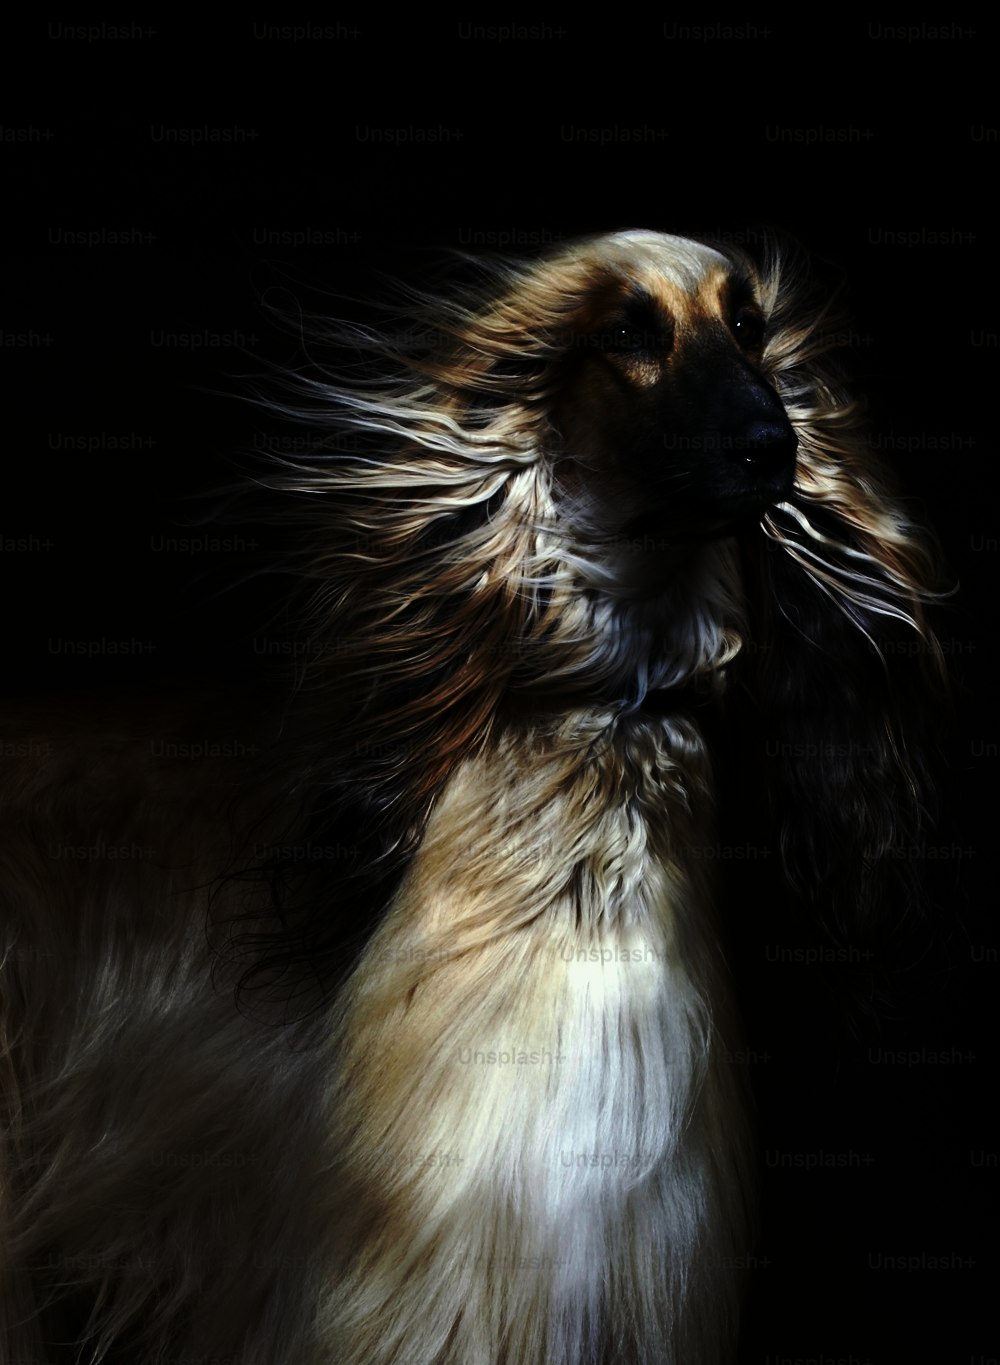 a close up of a dog with long hair